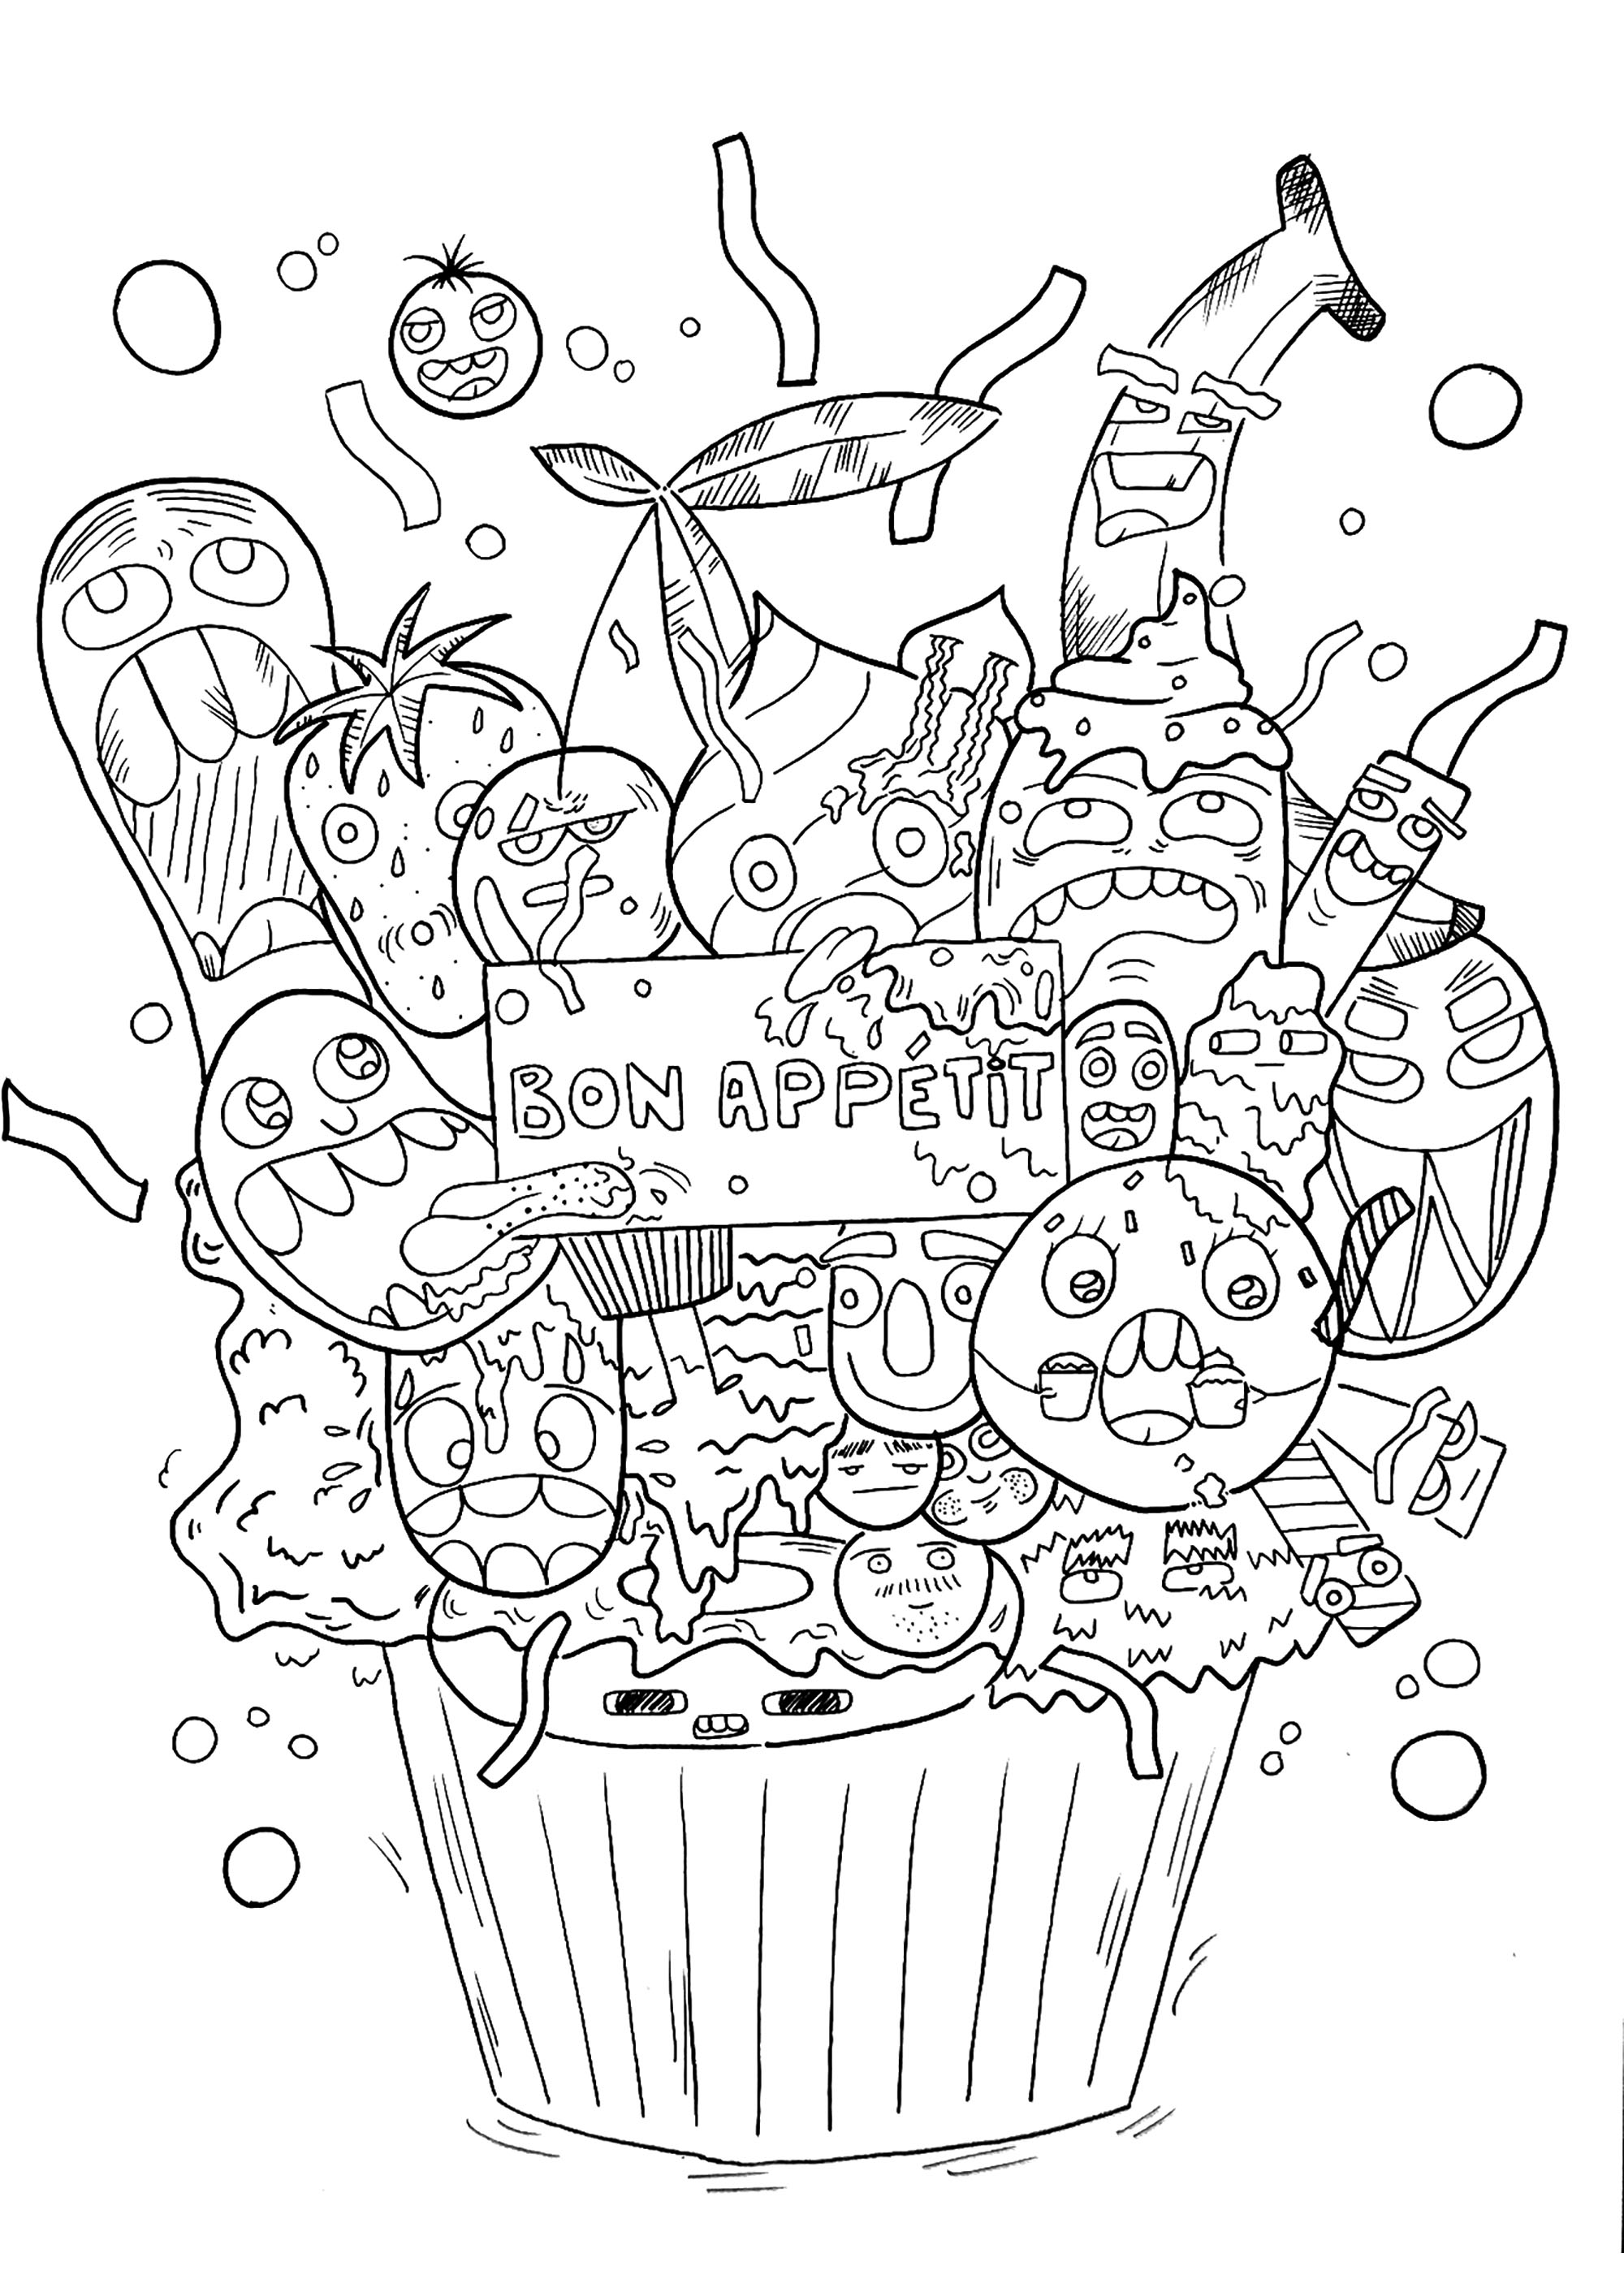 This huge cupcake with a doodle icing is going to be your favorite color dessert !, Artist : Lea